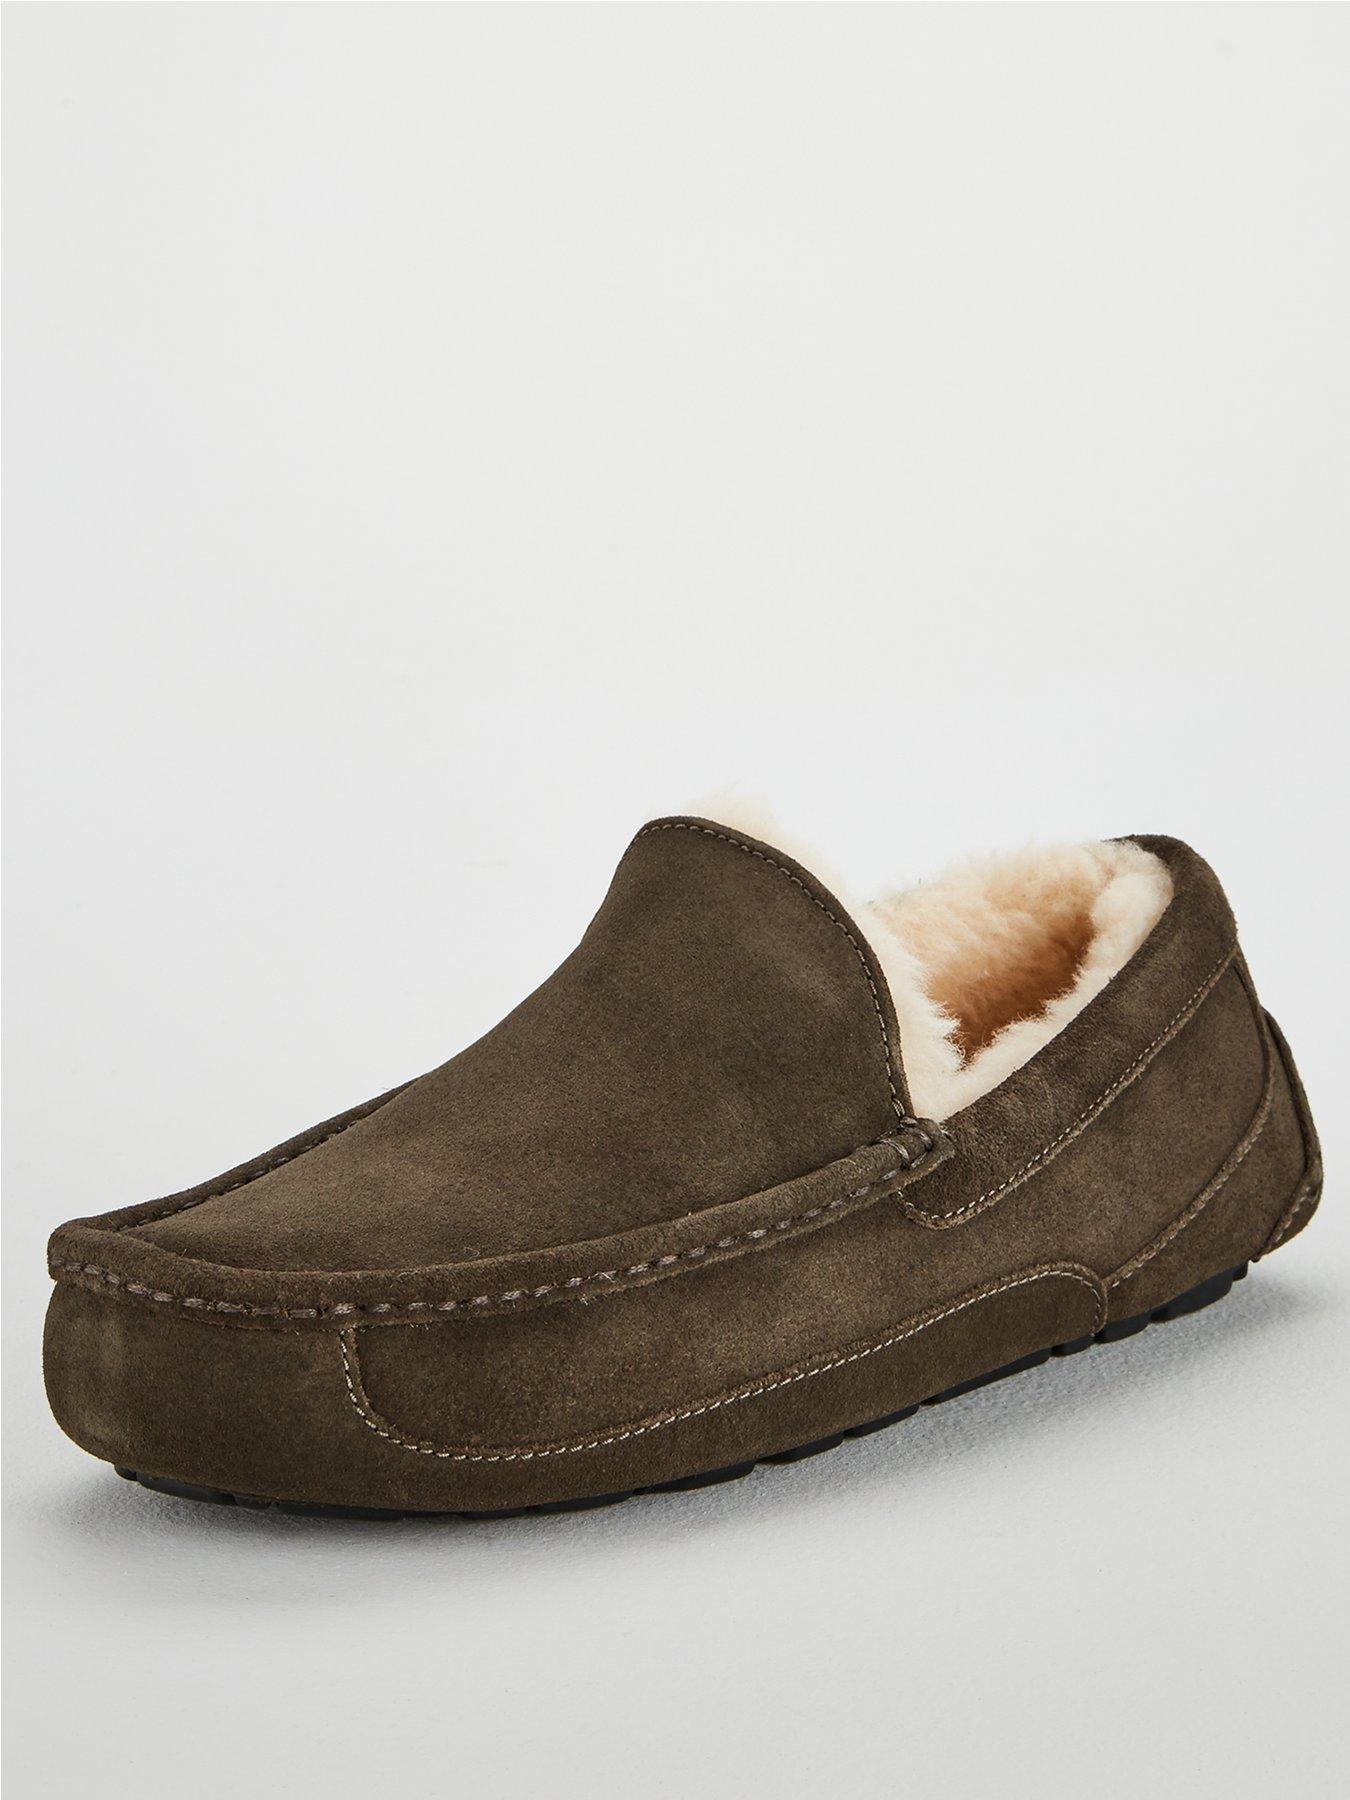 ugg mens slippers clearance uk